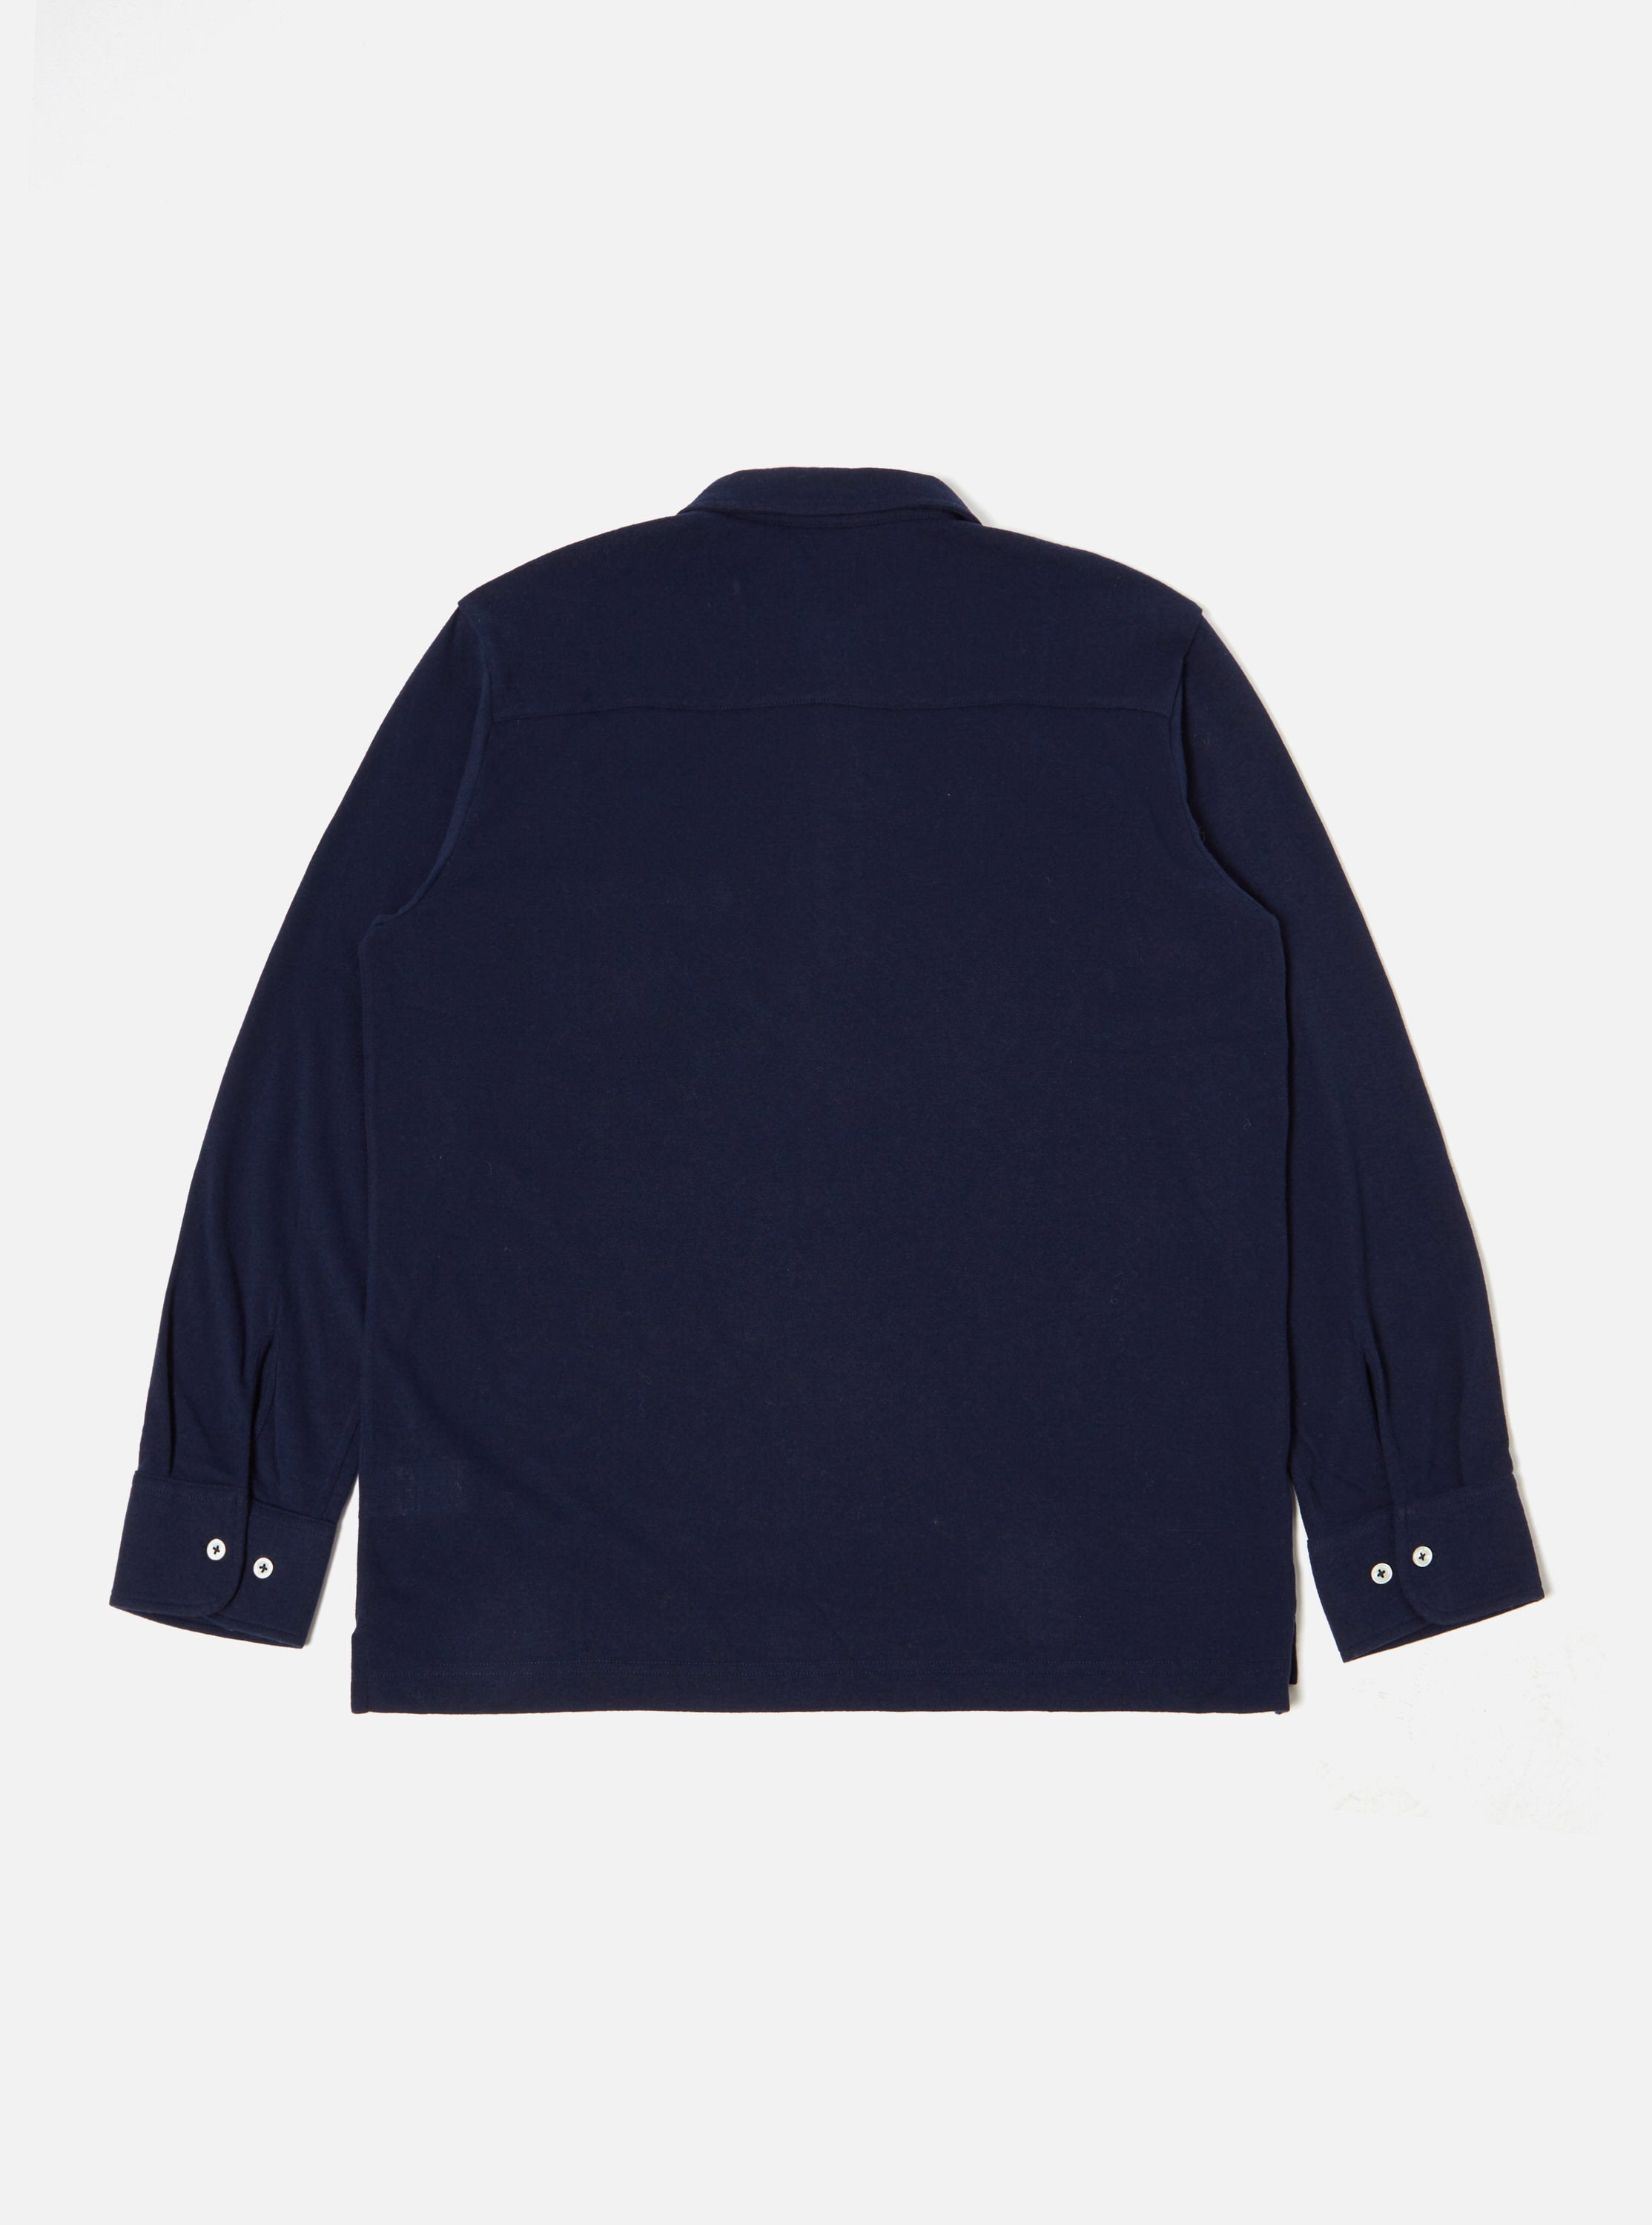 Universal Works Pullover L/S Shirt in Navy Recycled Wool Mix SJ